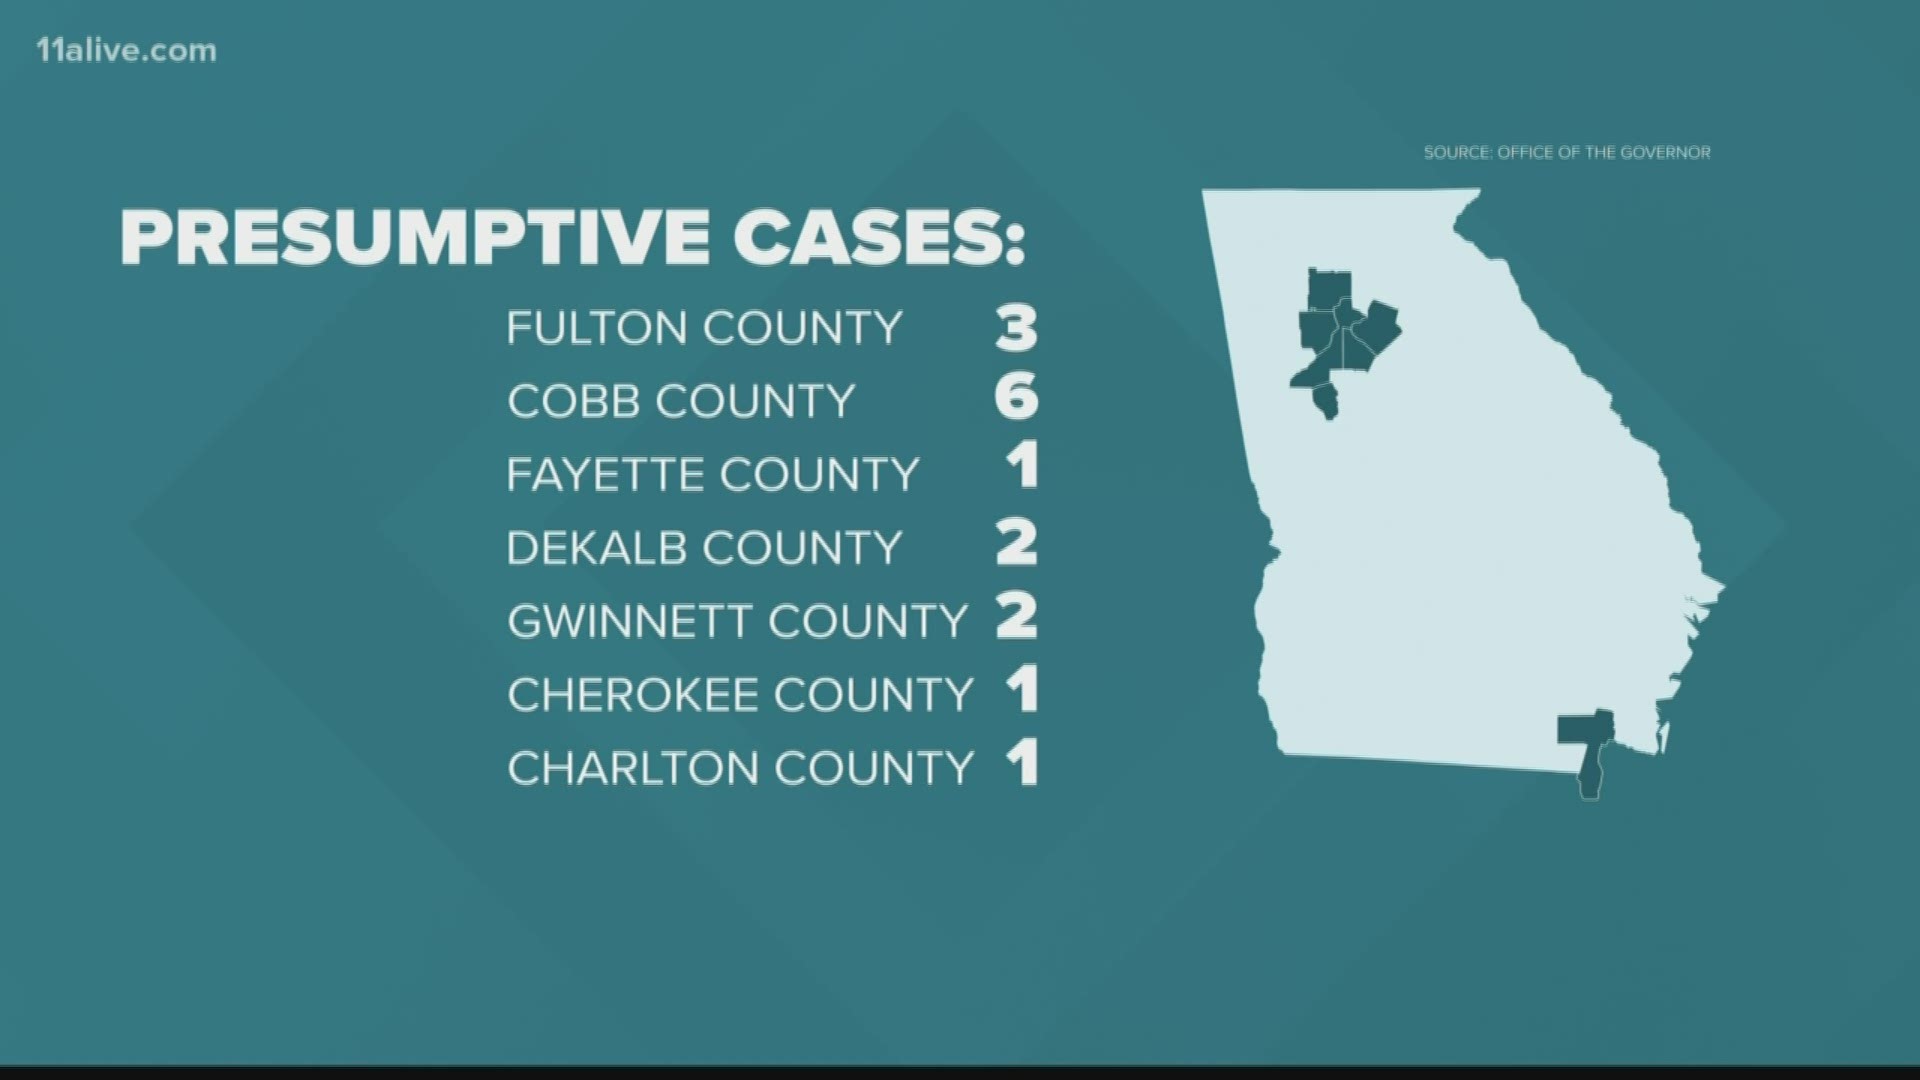 There are five additional presumptive positive cases in the state.